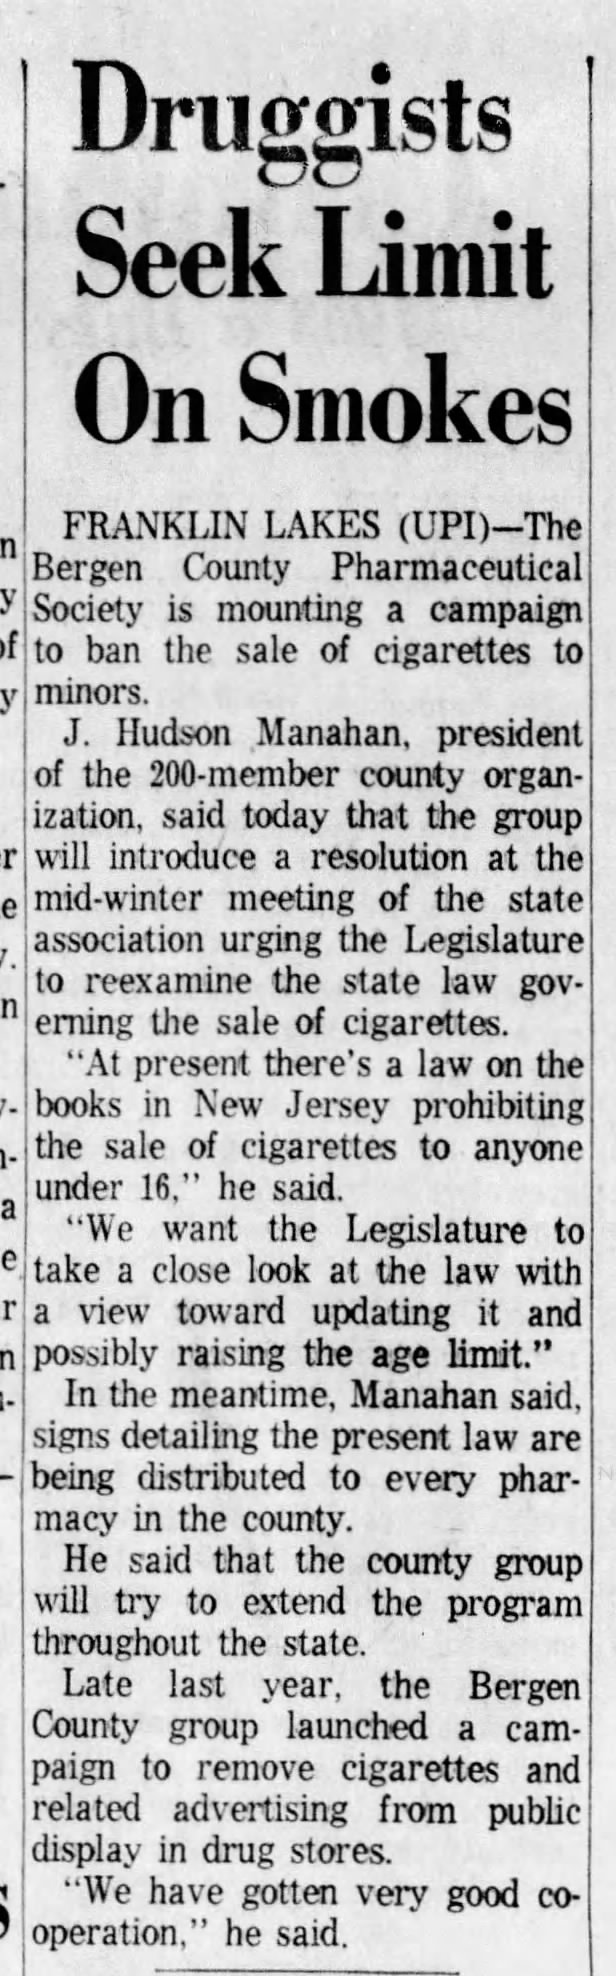 1964 Hudson Manahan campaign to ban sale of cigarettes to minors